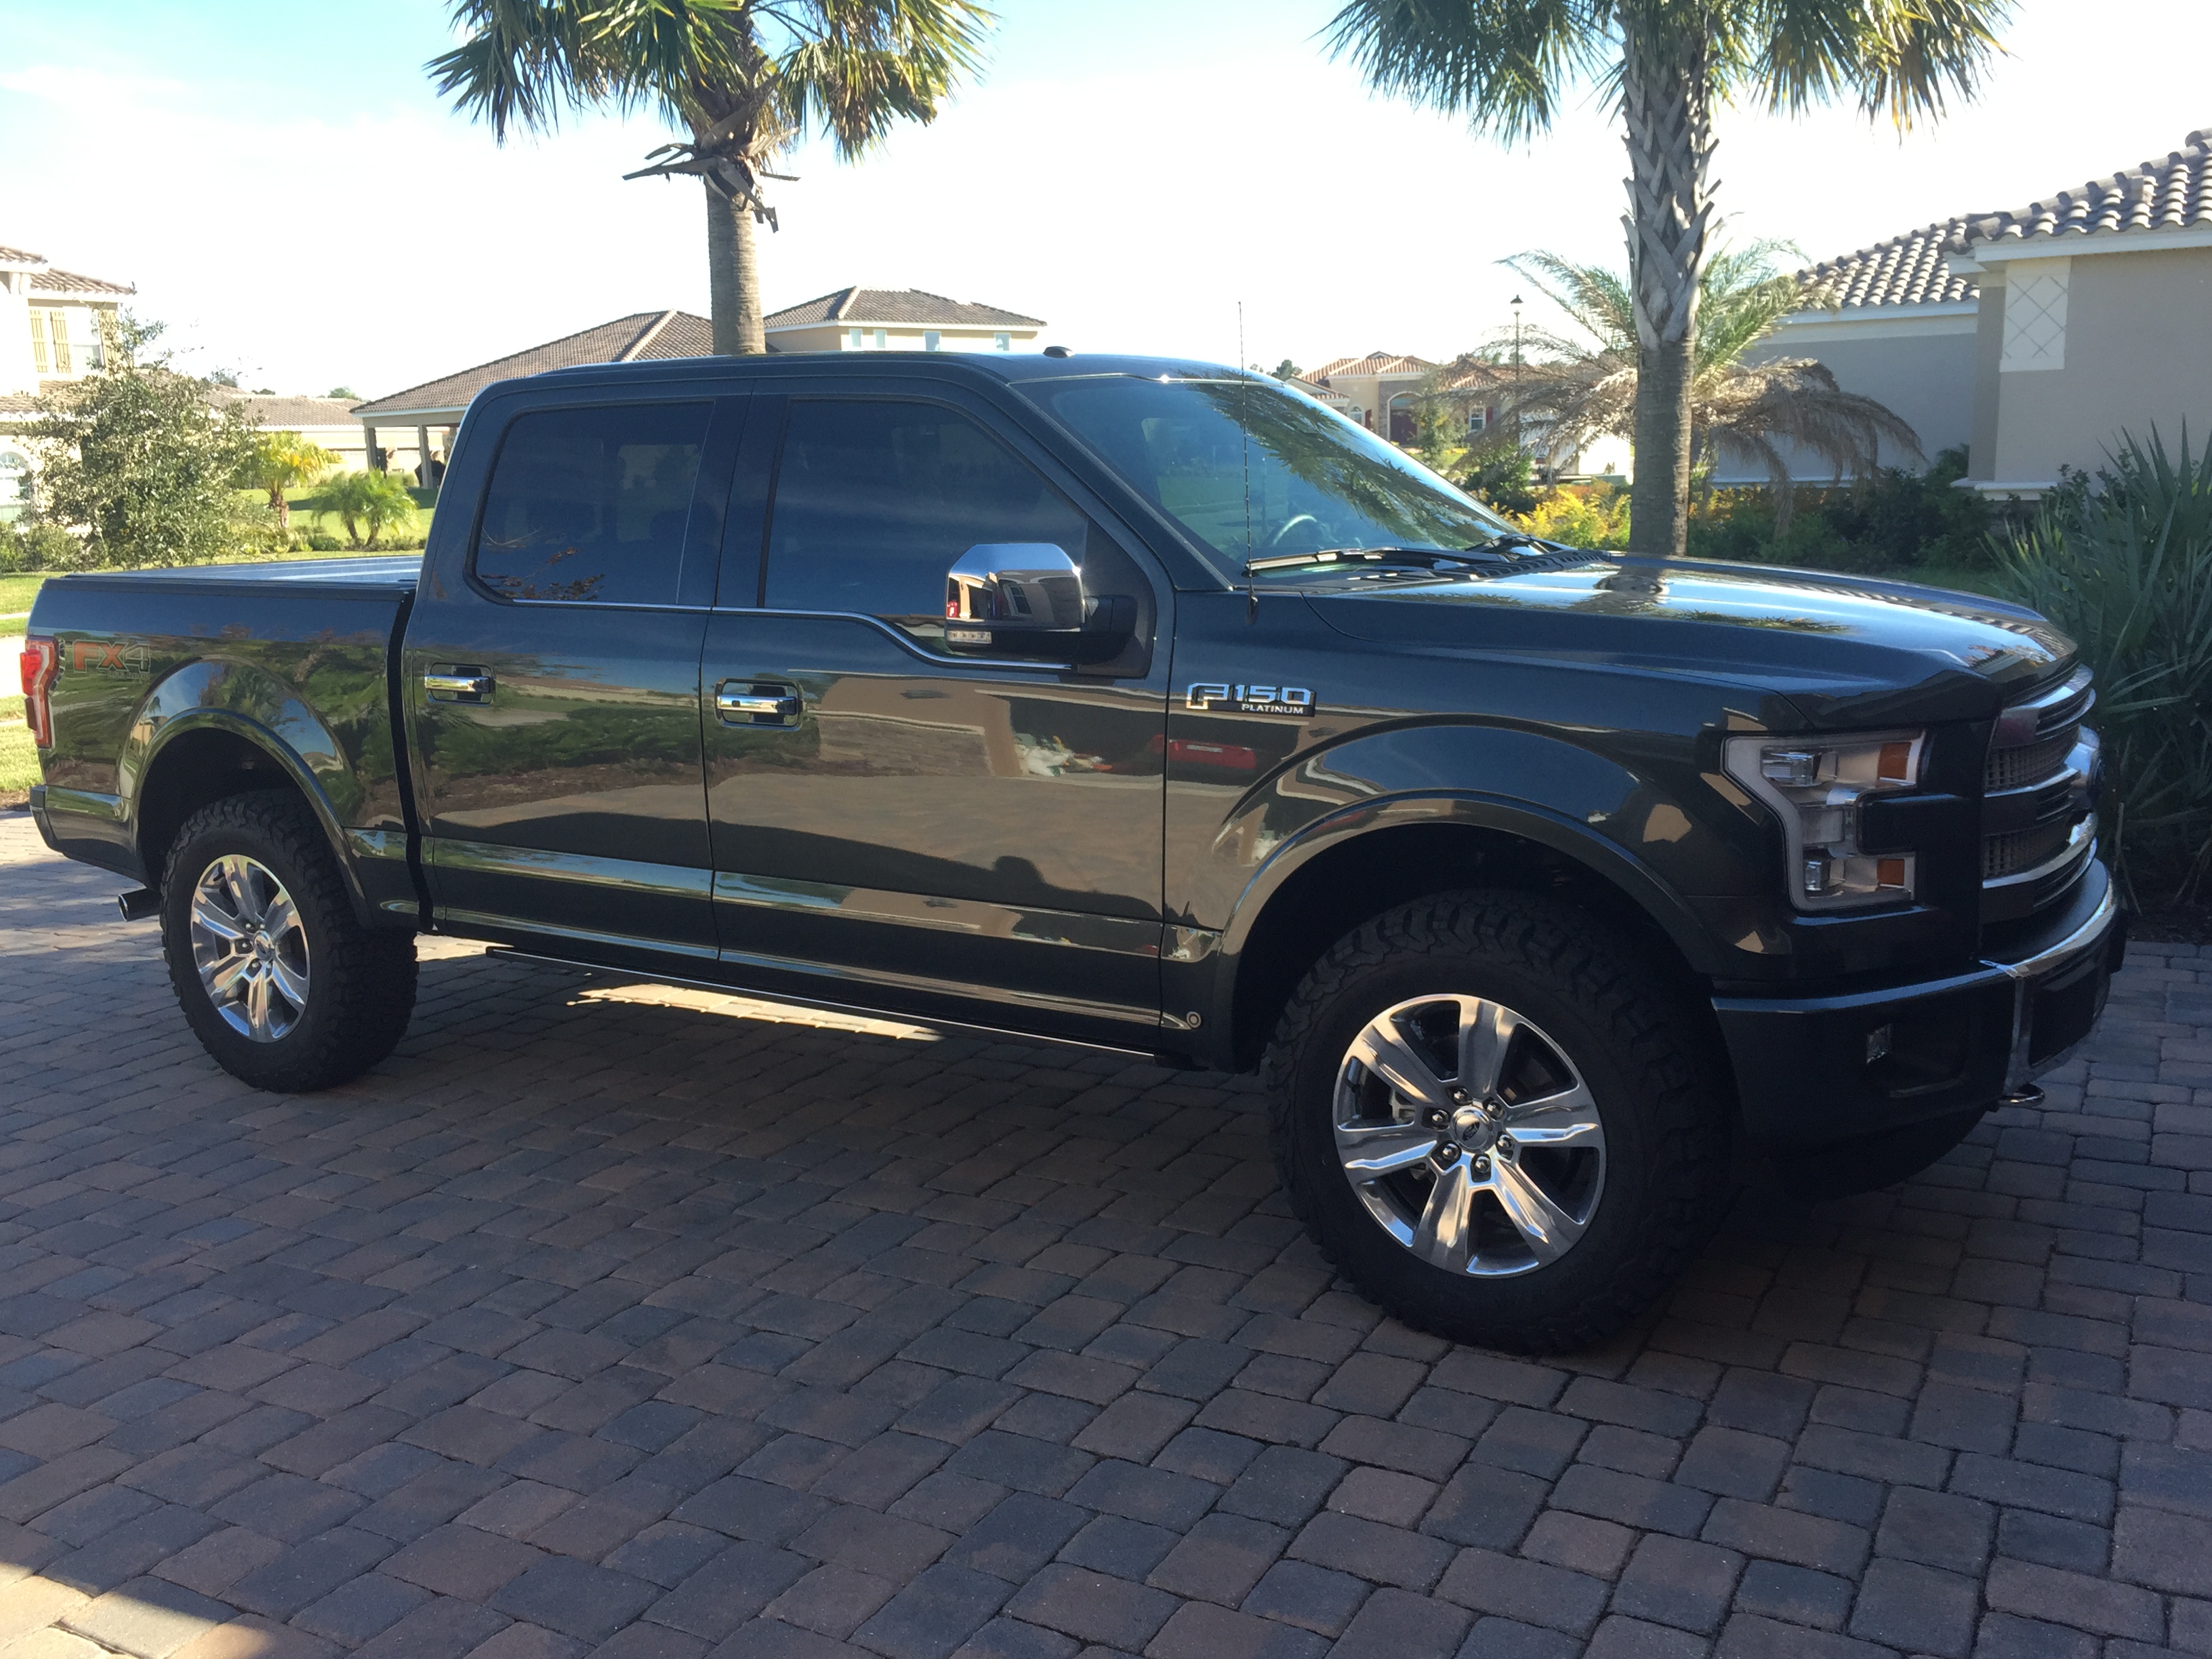 Show Me Your Leveled Trucks With Oem Rims Ford F150 Forum